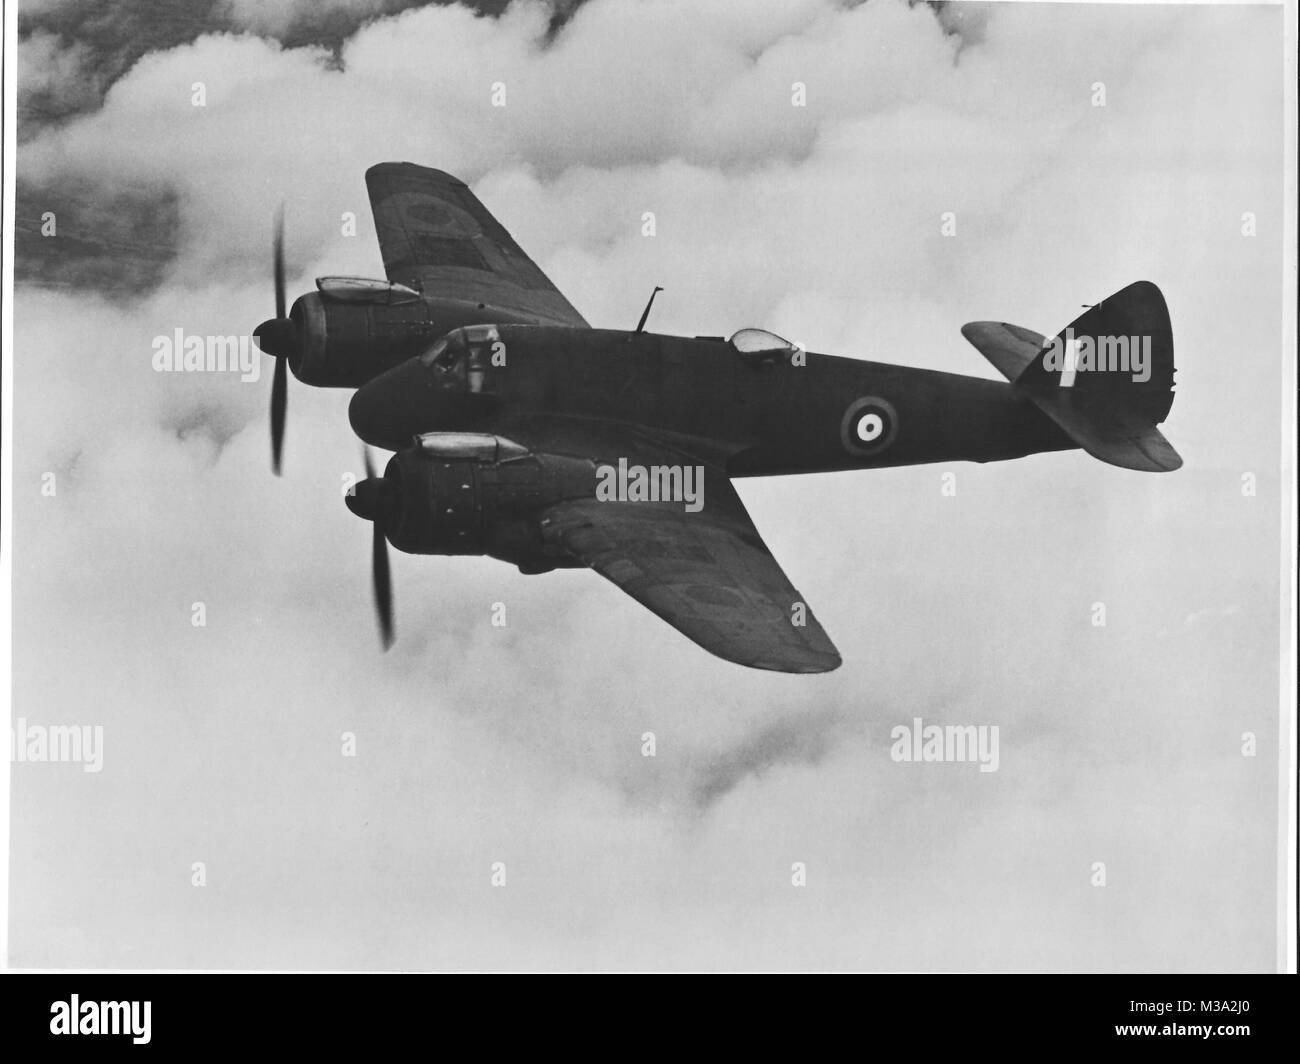 Bristol Beaufighter, Bristol Type 156. Two Bristol Hercules sleeve valve, 1,600h.p. engines. Originally designed as the world's most formidable night-fighter, was developed as a day fighter, bomber, torpedo carrier and long-range reconnaissance aircraft. 1940 Stock Photo